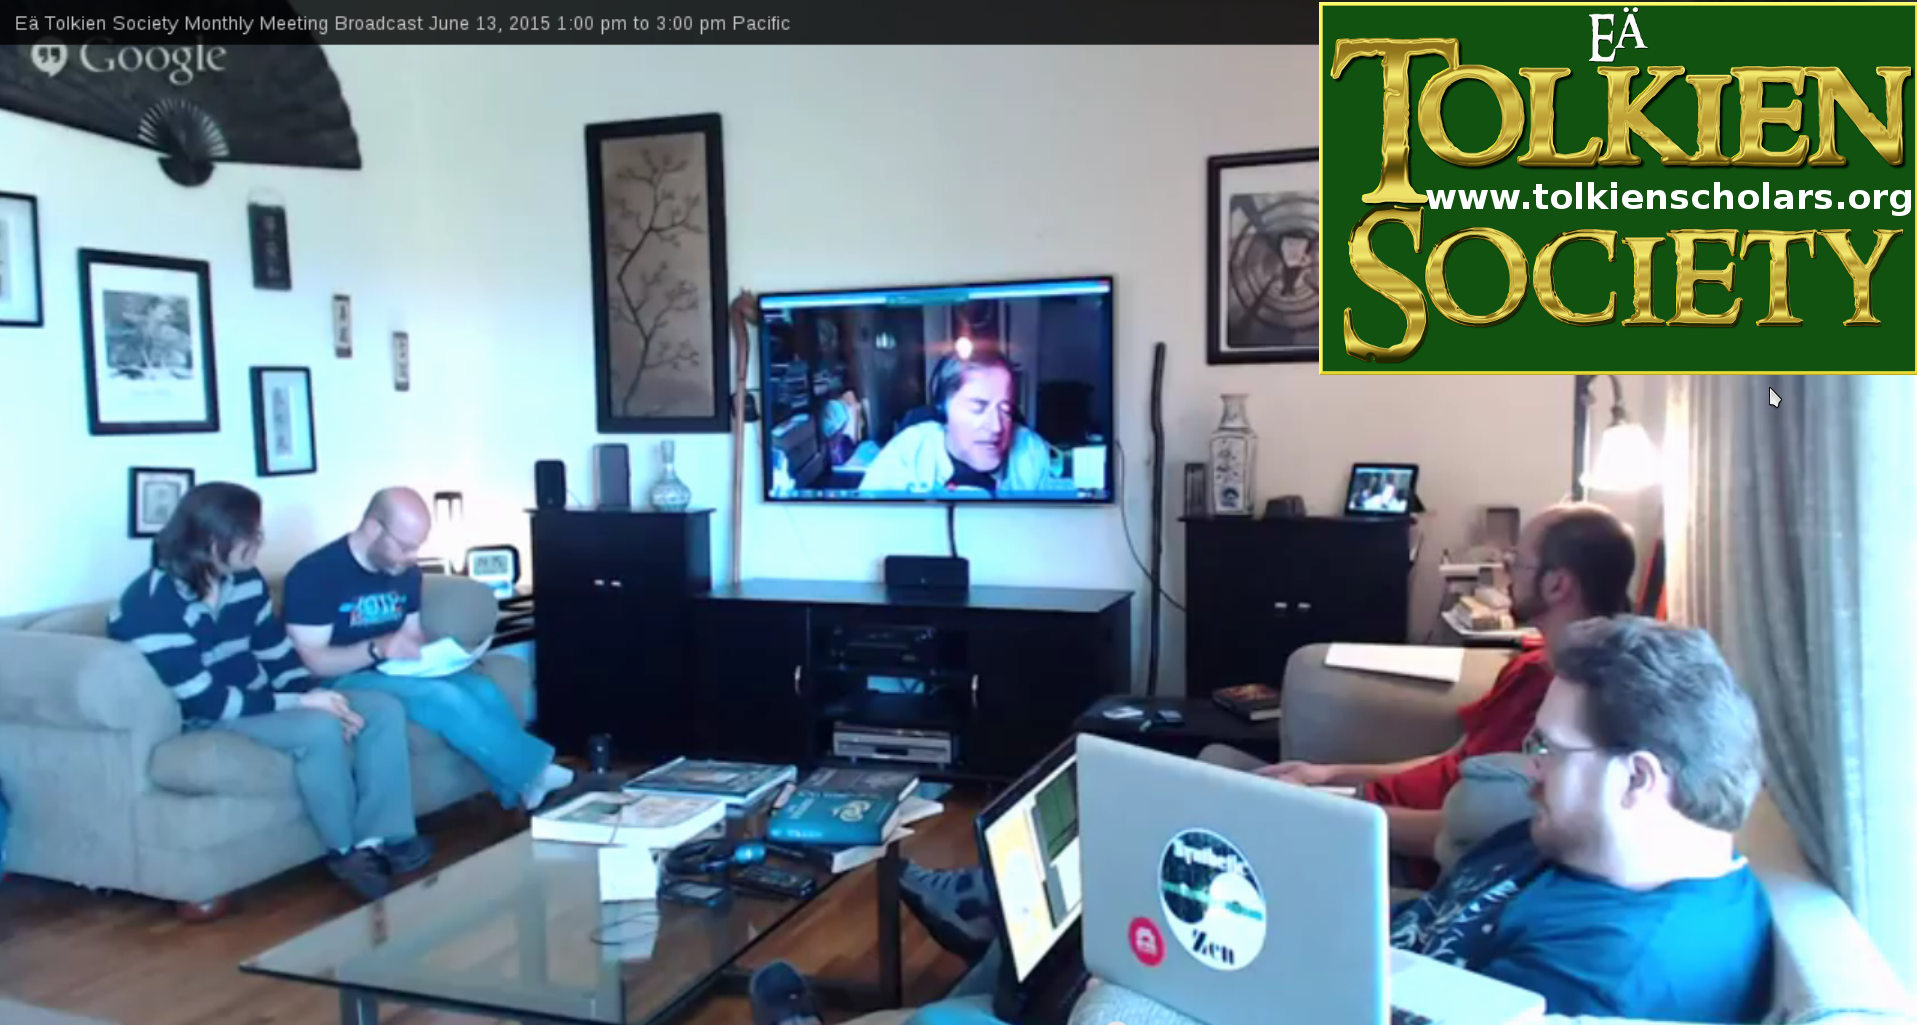 Eä Tolkien Society Monthly Meeting Notes, May 2016